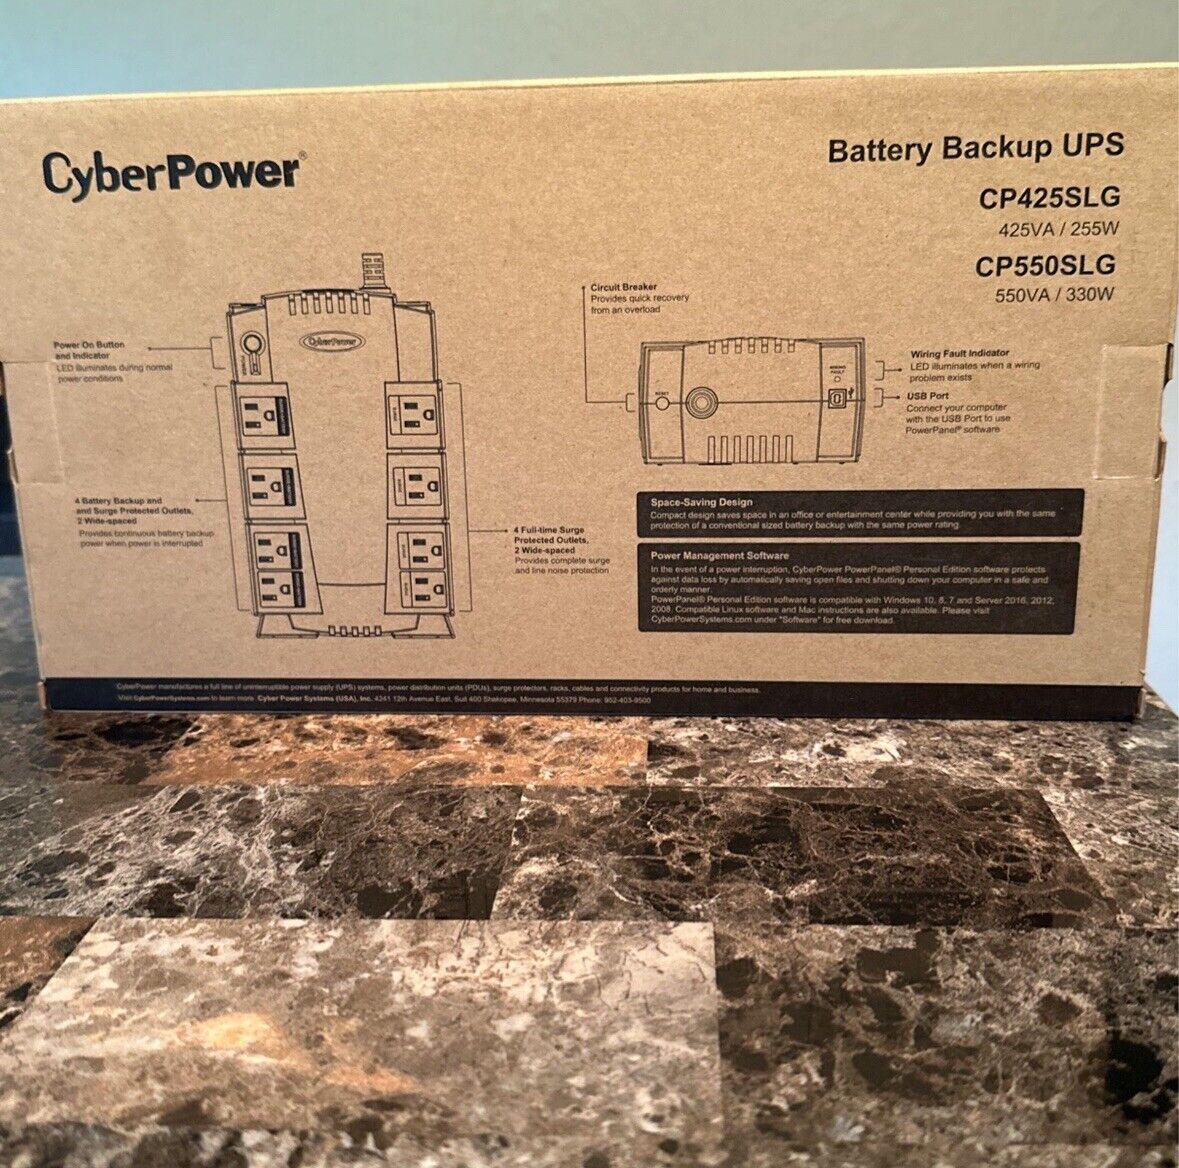 CyberPower CP550SLG 330W 8-Outlet Standby UPS System